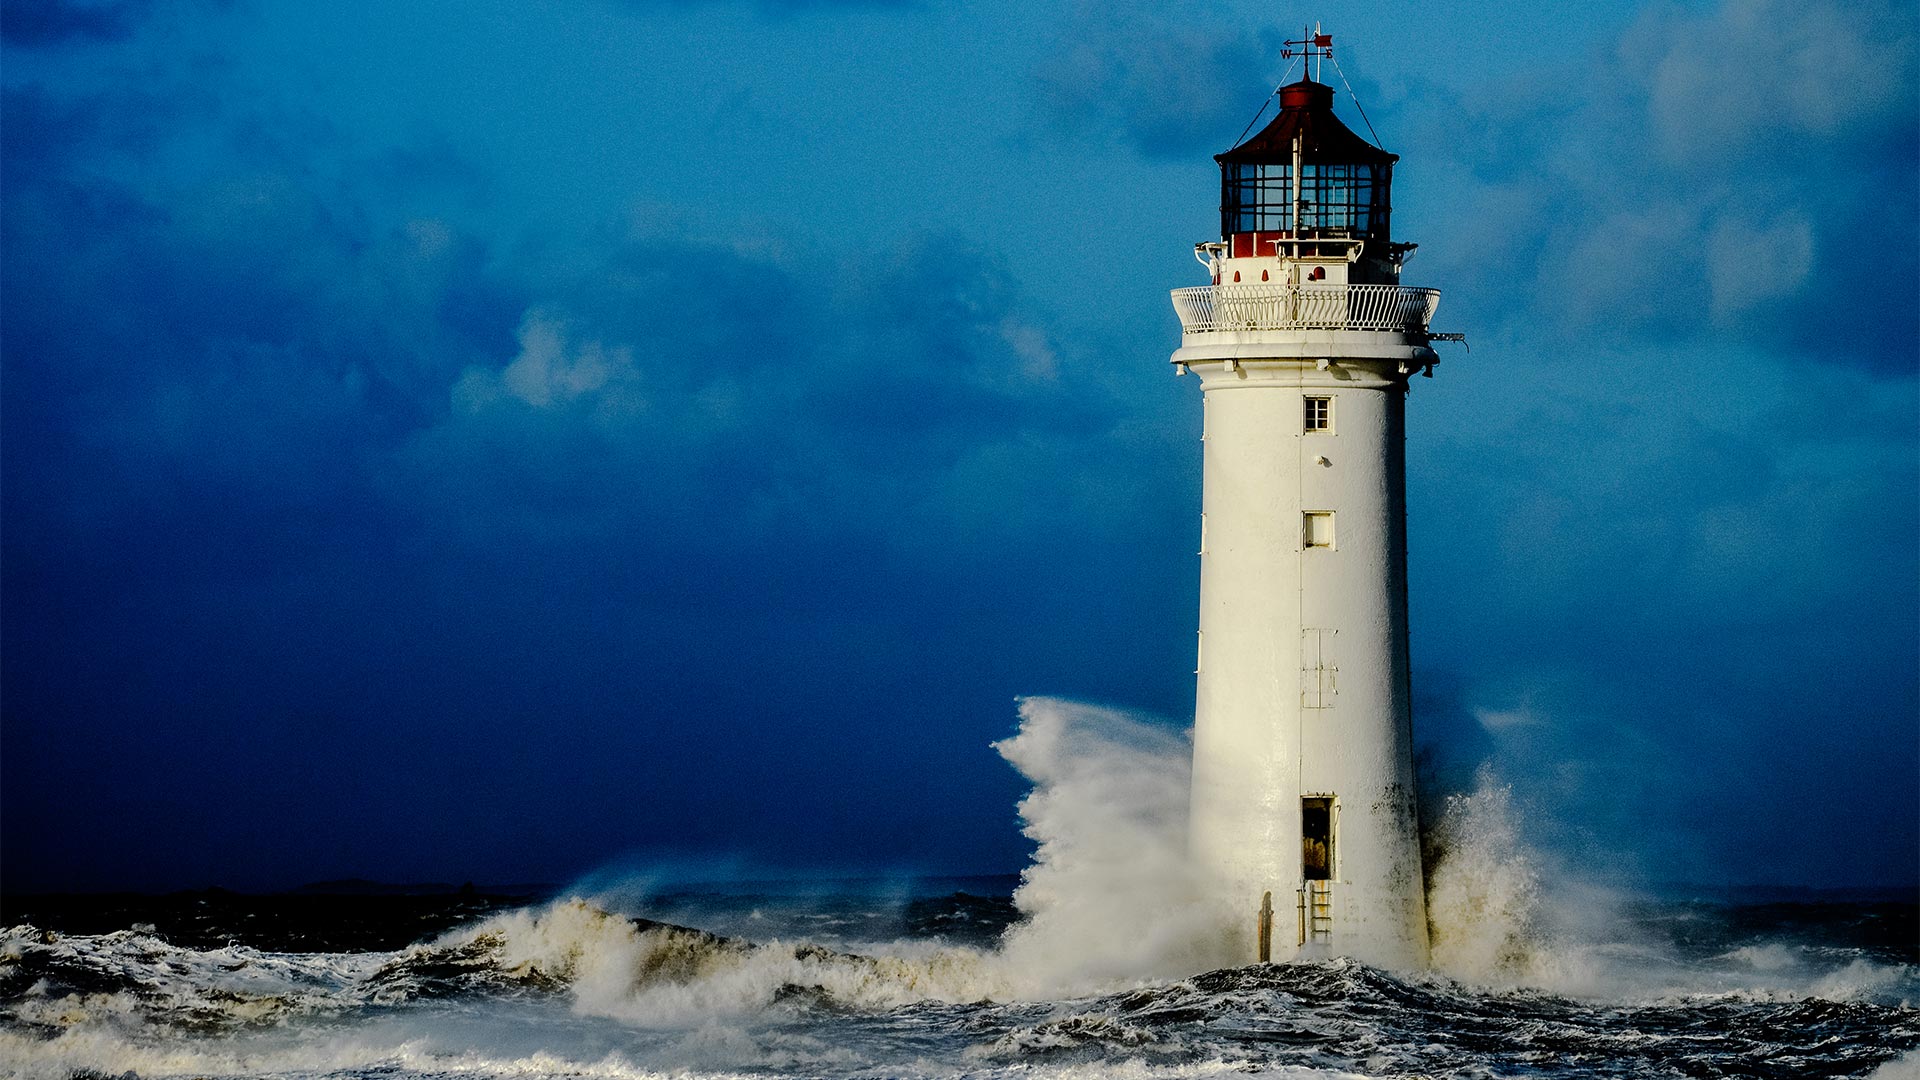 Lighthouse standing with waves crashing into it